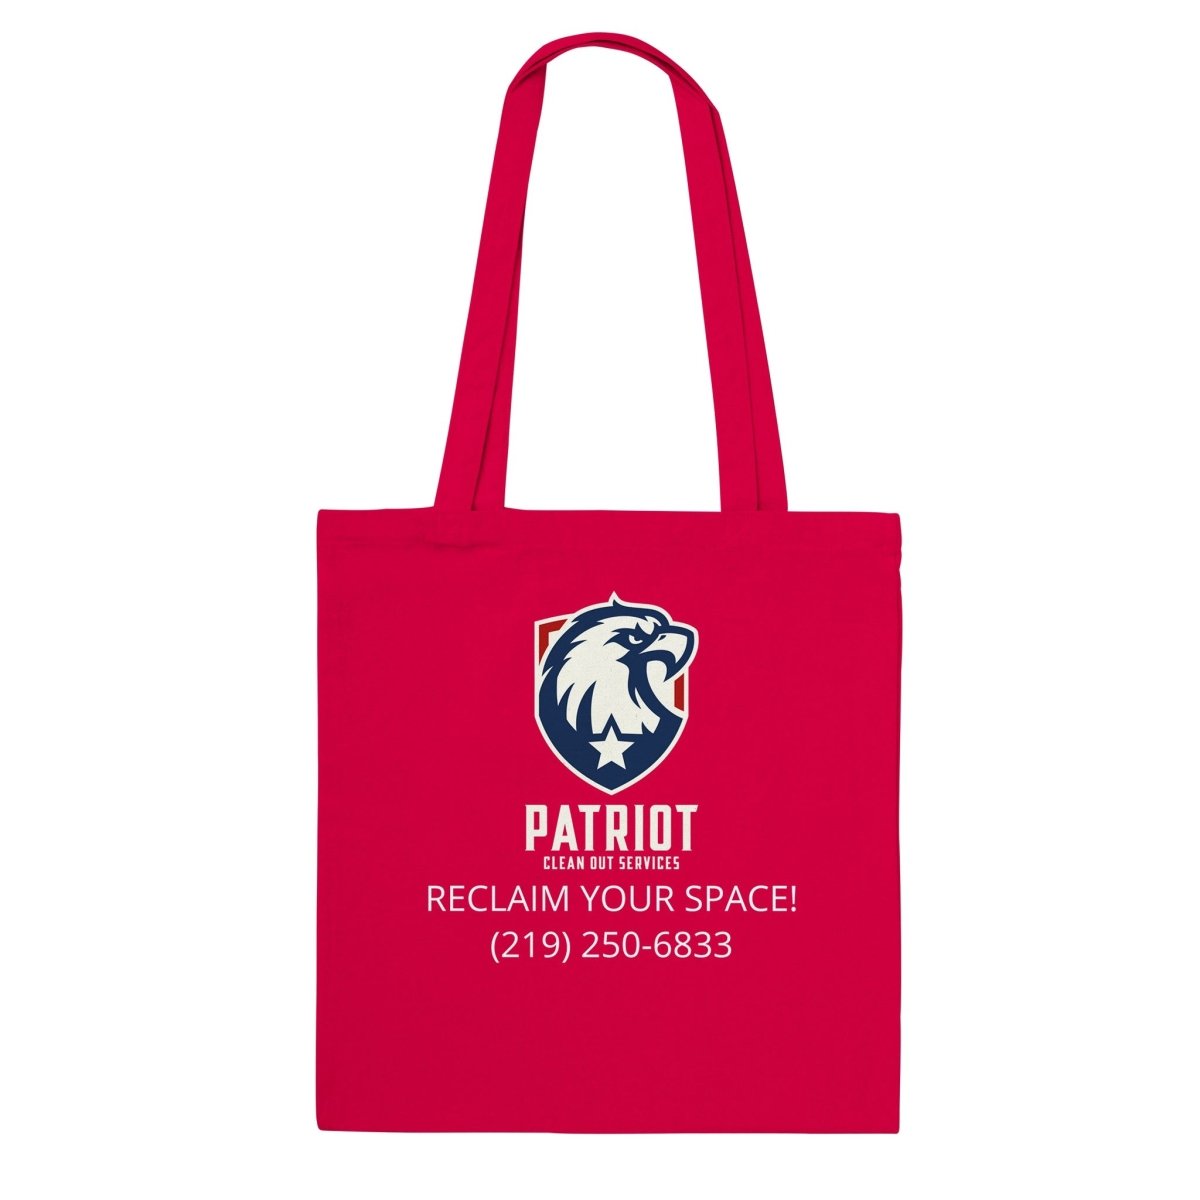 Patriotic Tote Bag with Patriot Clean Out Logo and long handles - Print Material - Red